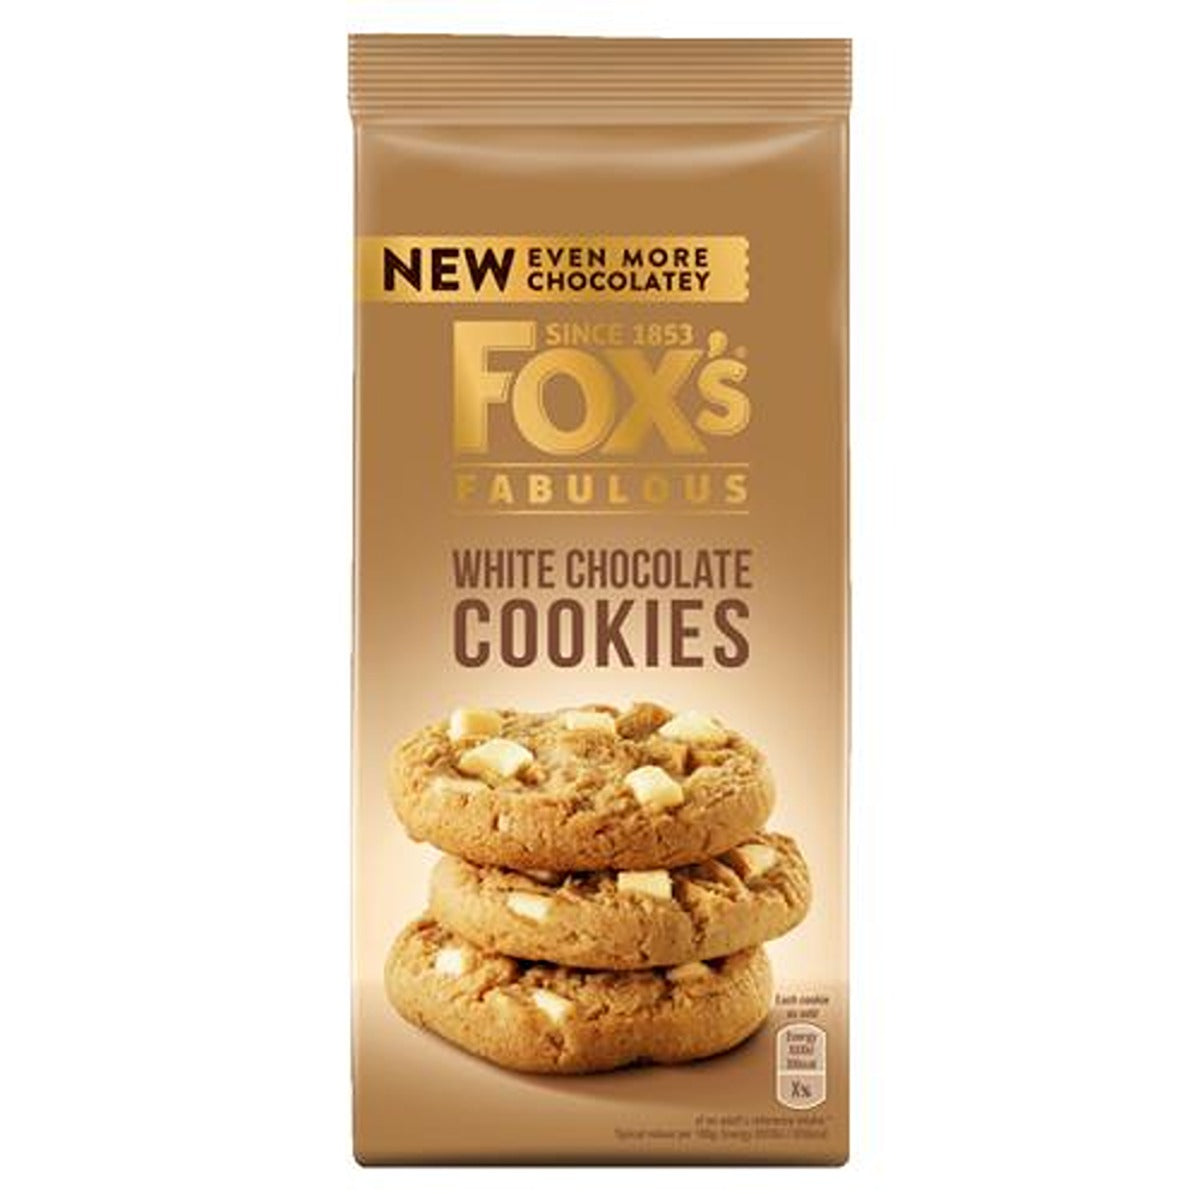 Fox's - Fabulous White Chocolate Cookies - 180 g - Continental Food Store